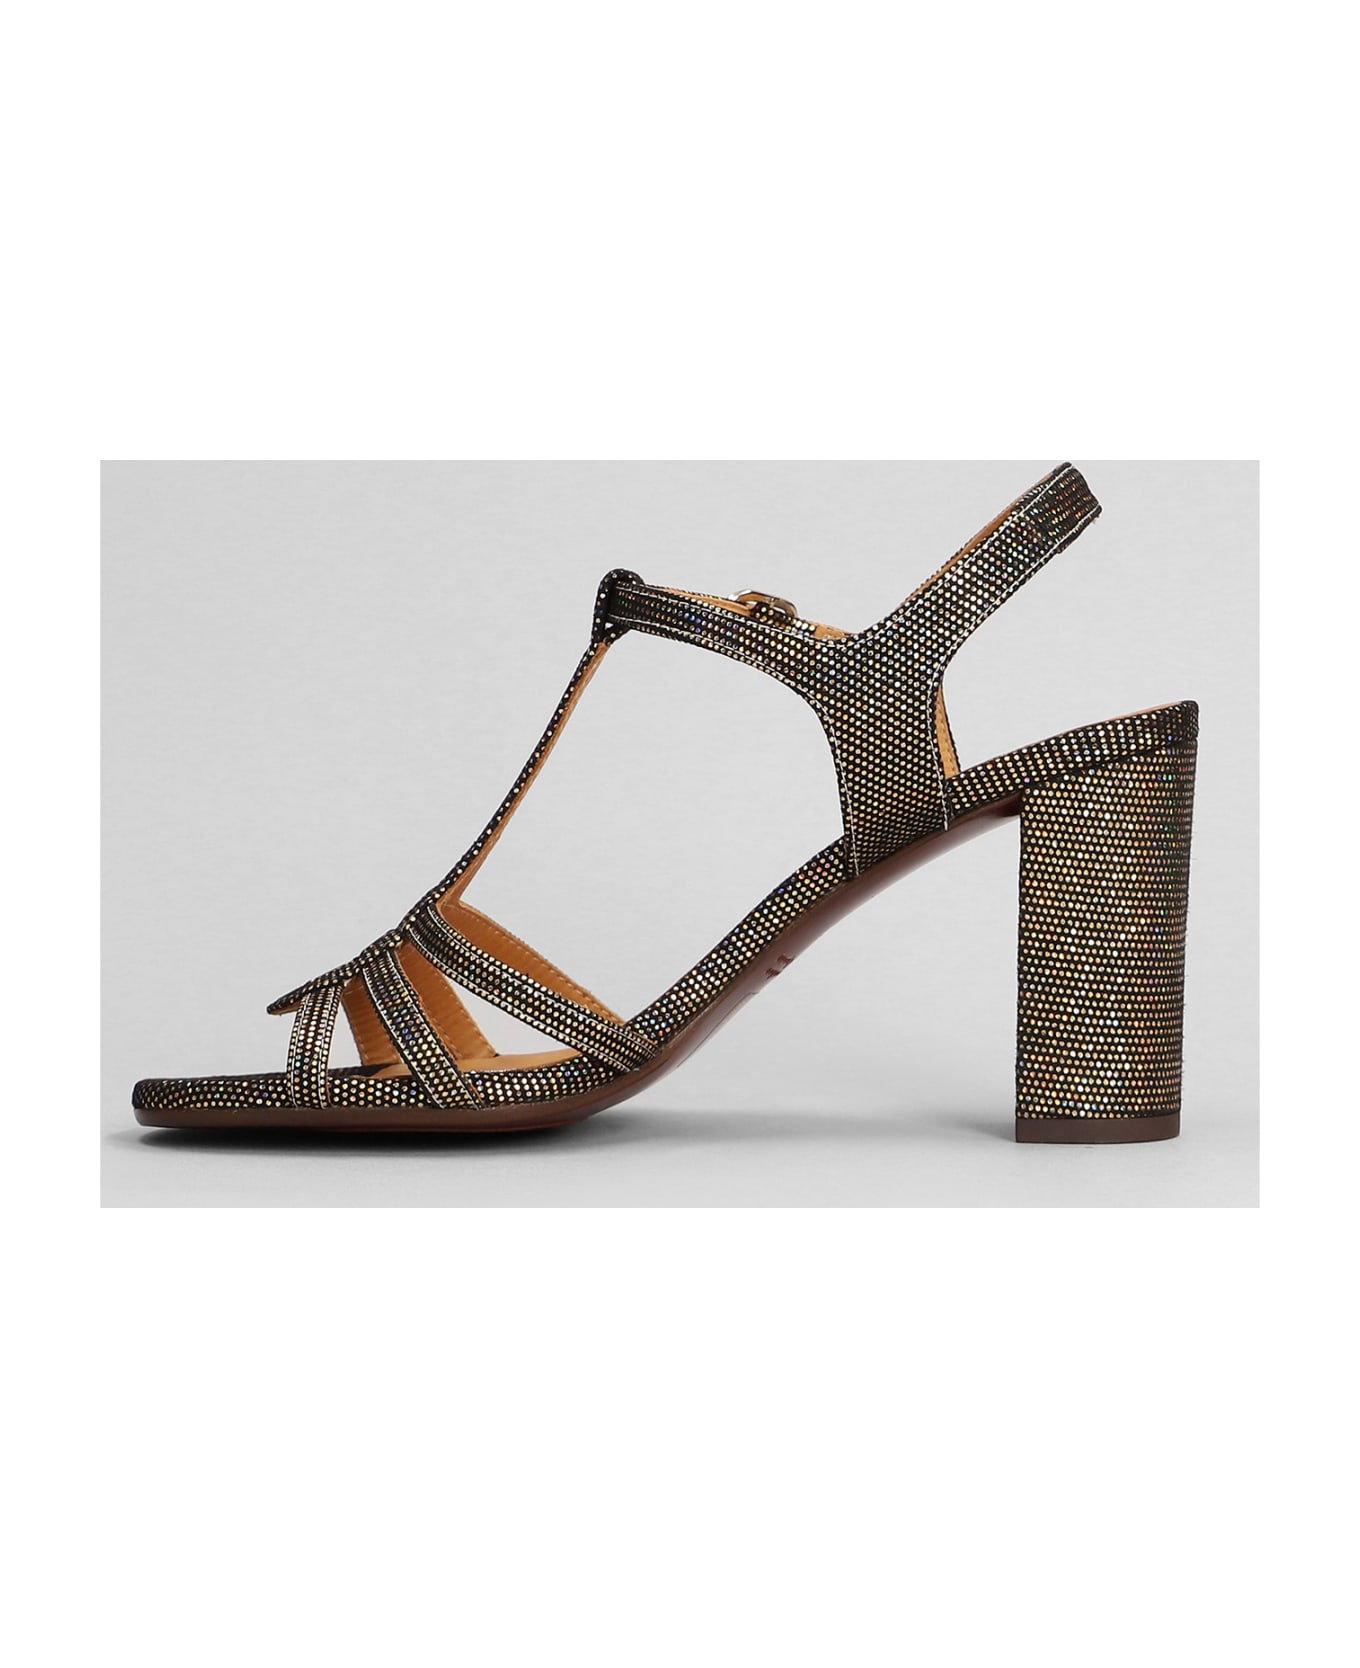 Chie Mihara Babi 44 Sandals In Gold Leather - gold